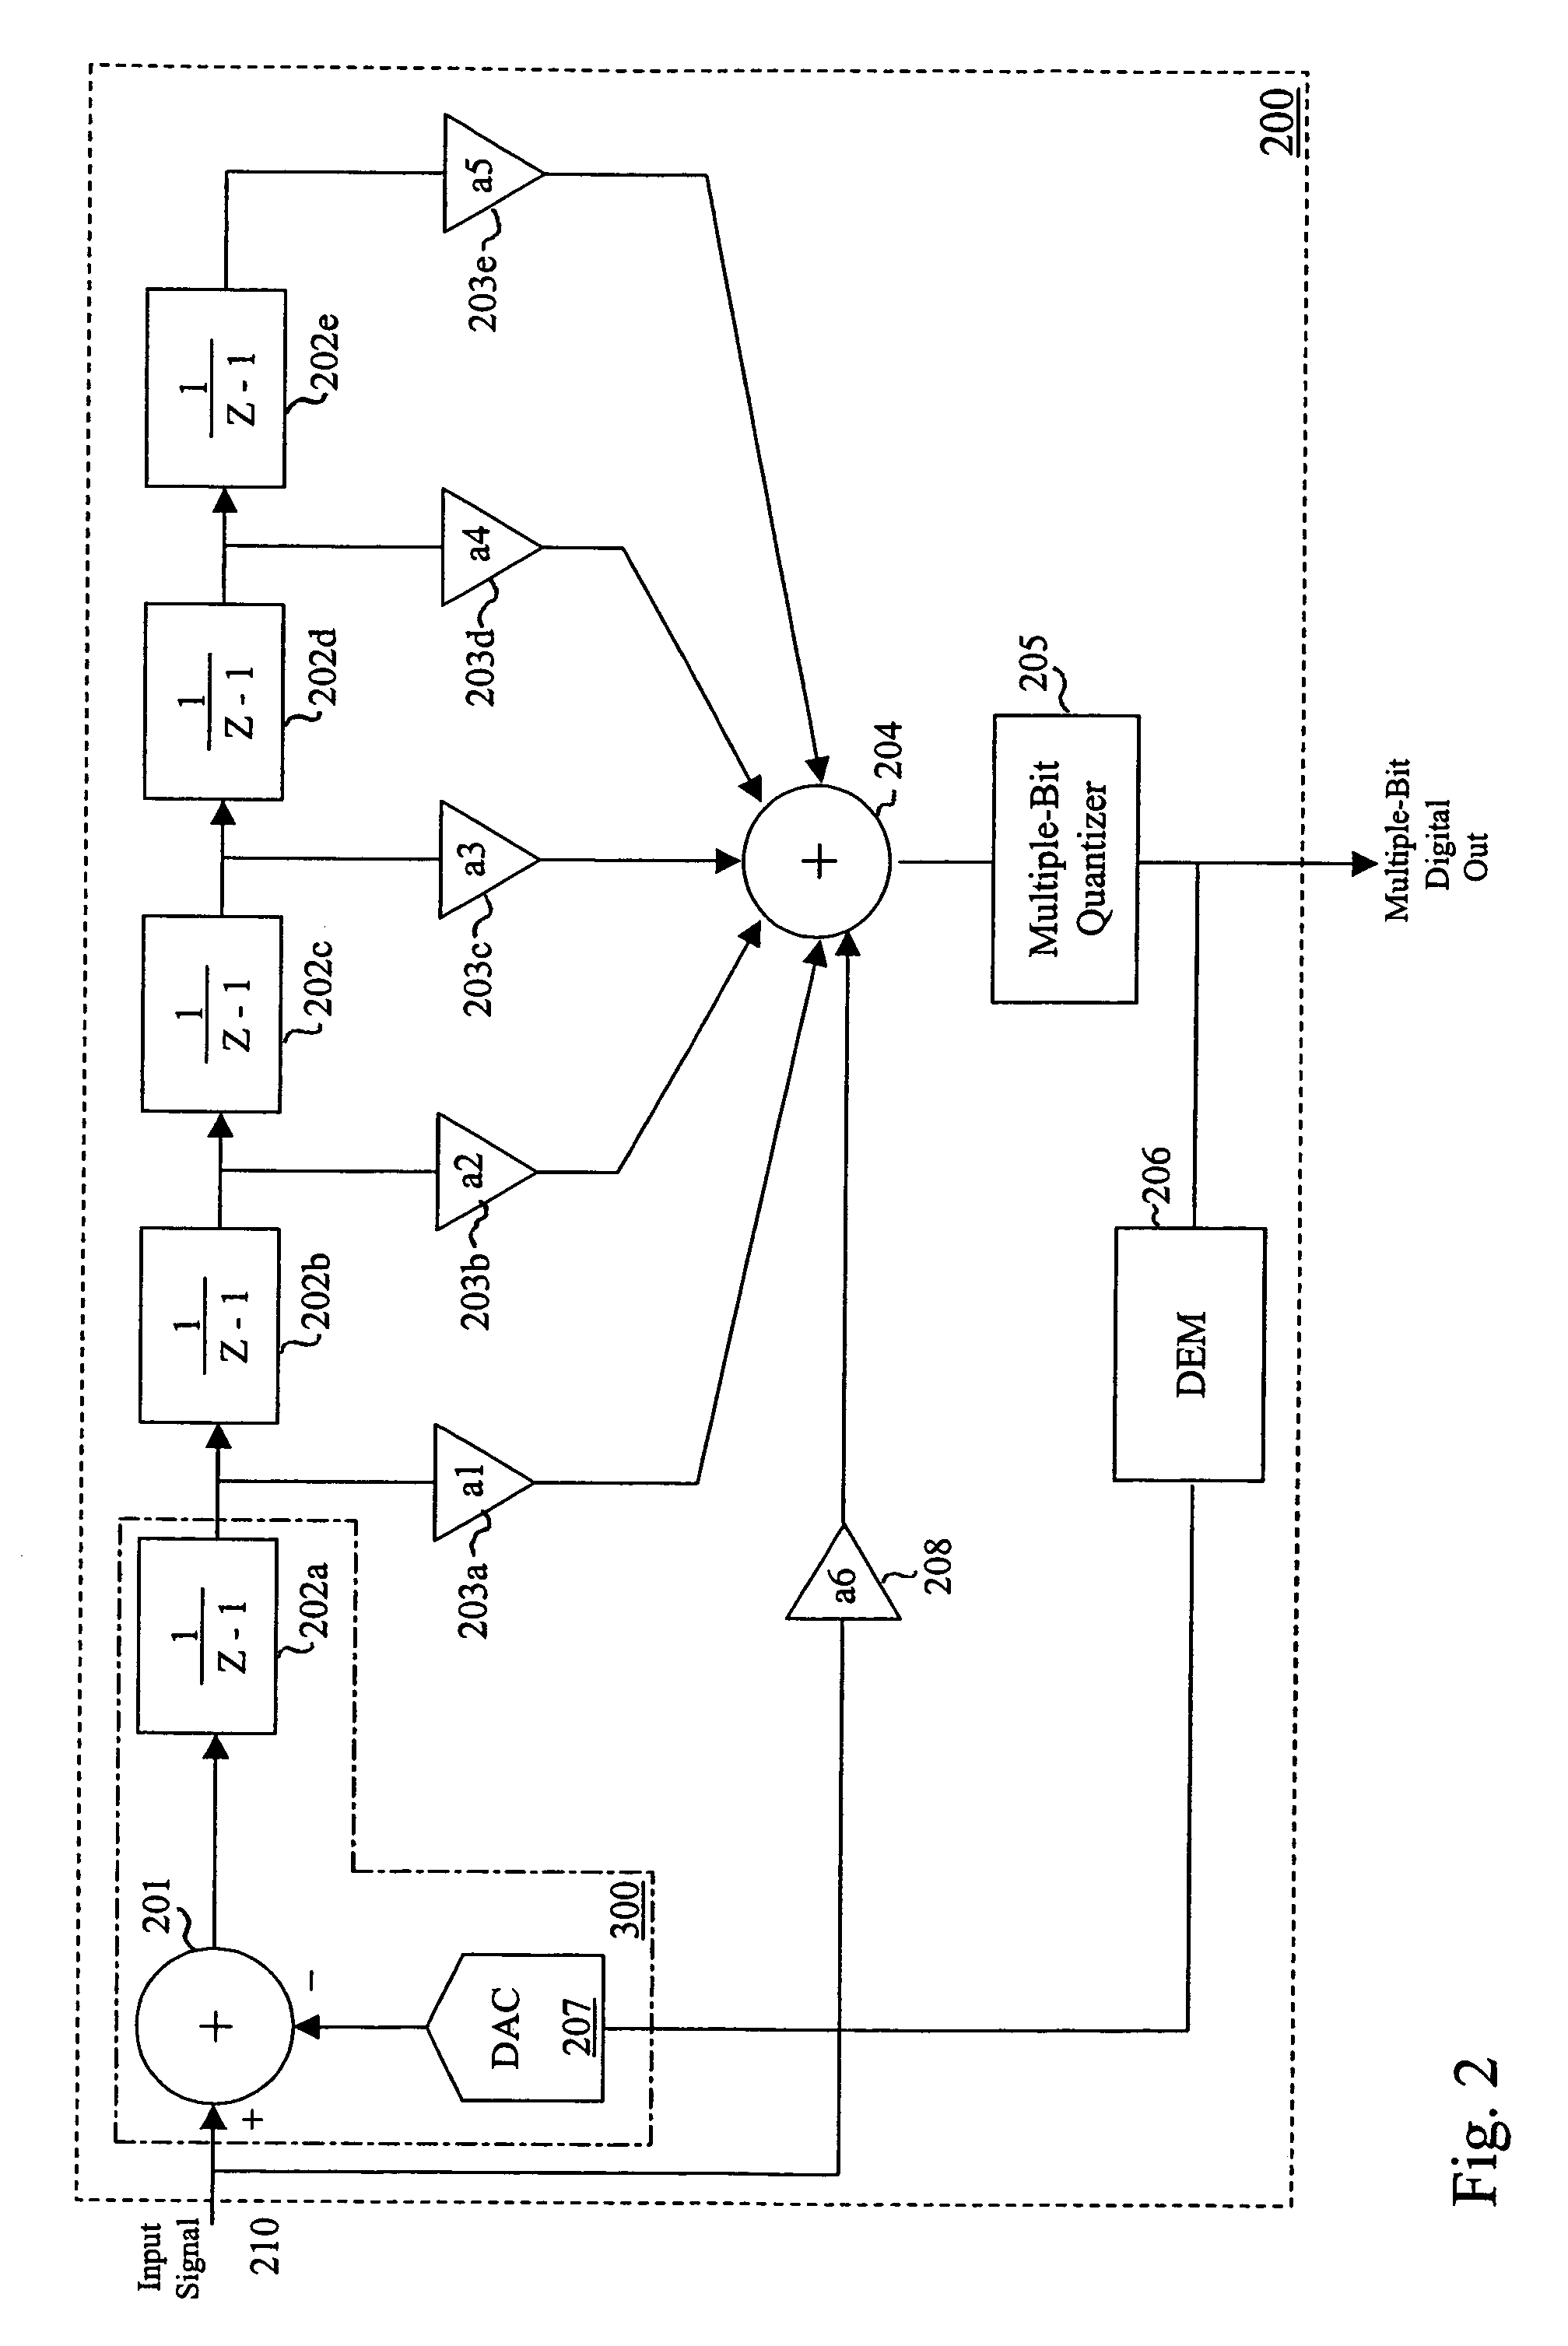 Delta-sigma modulators with improved noise performance